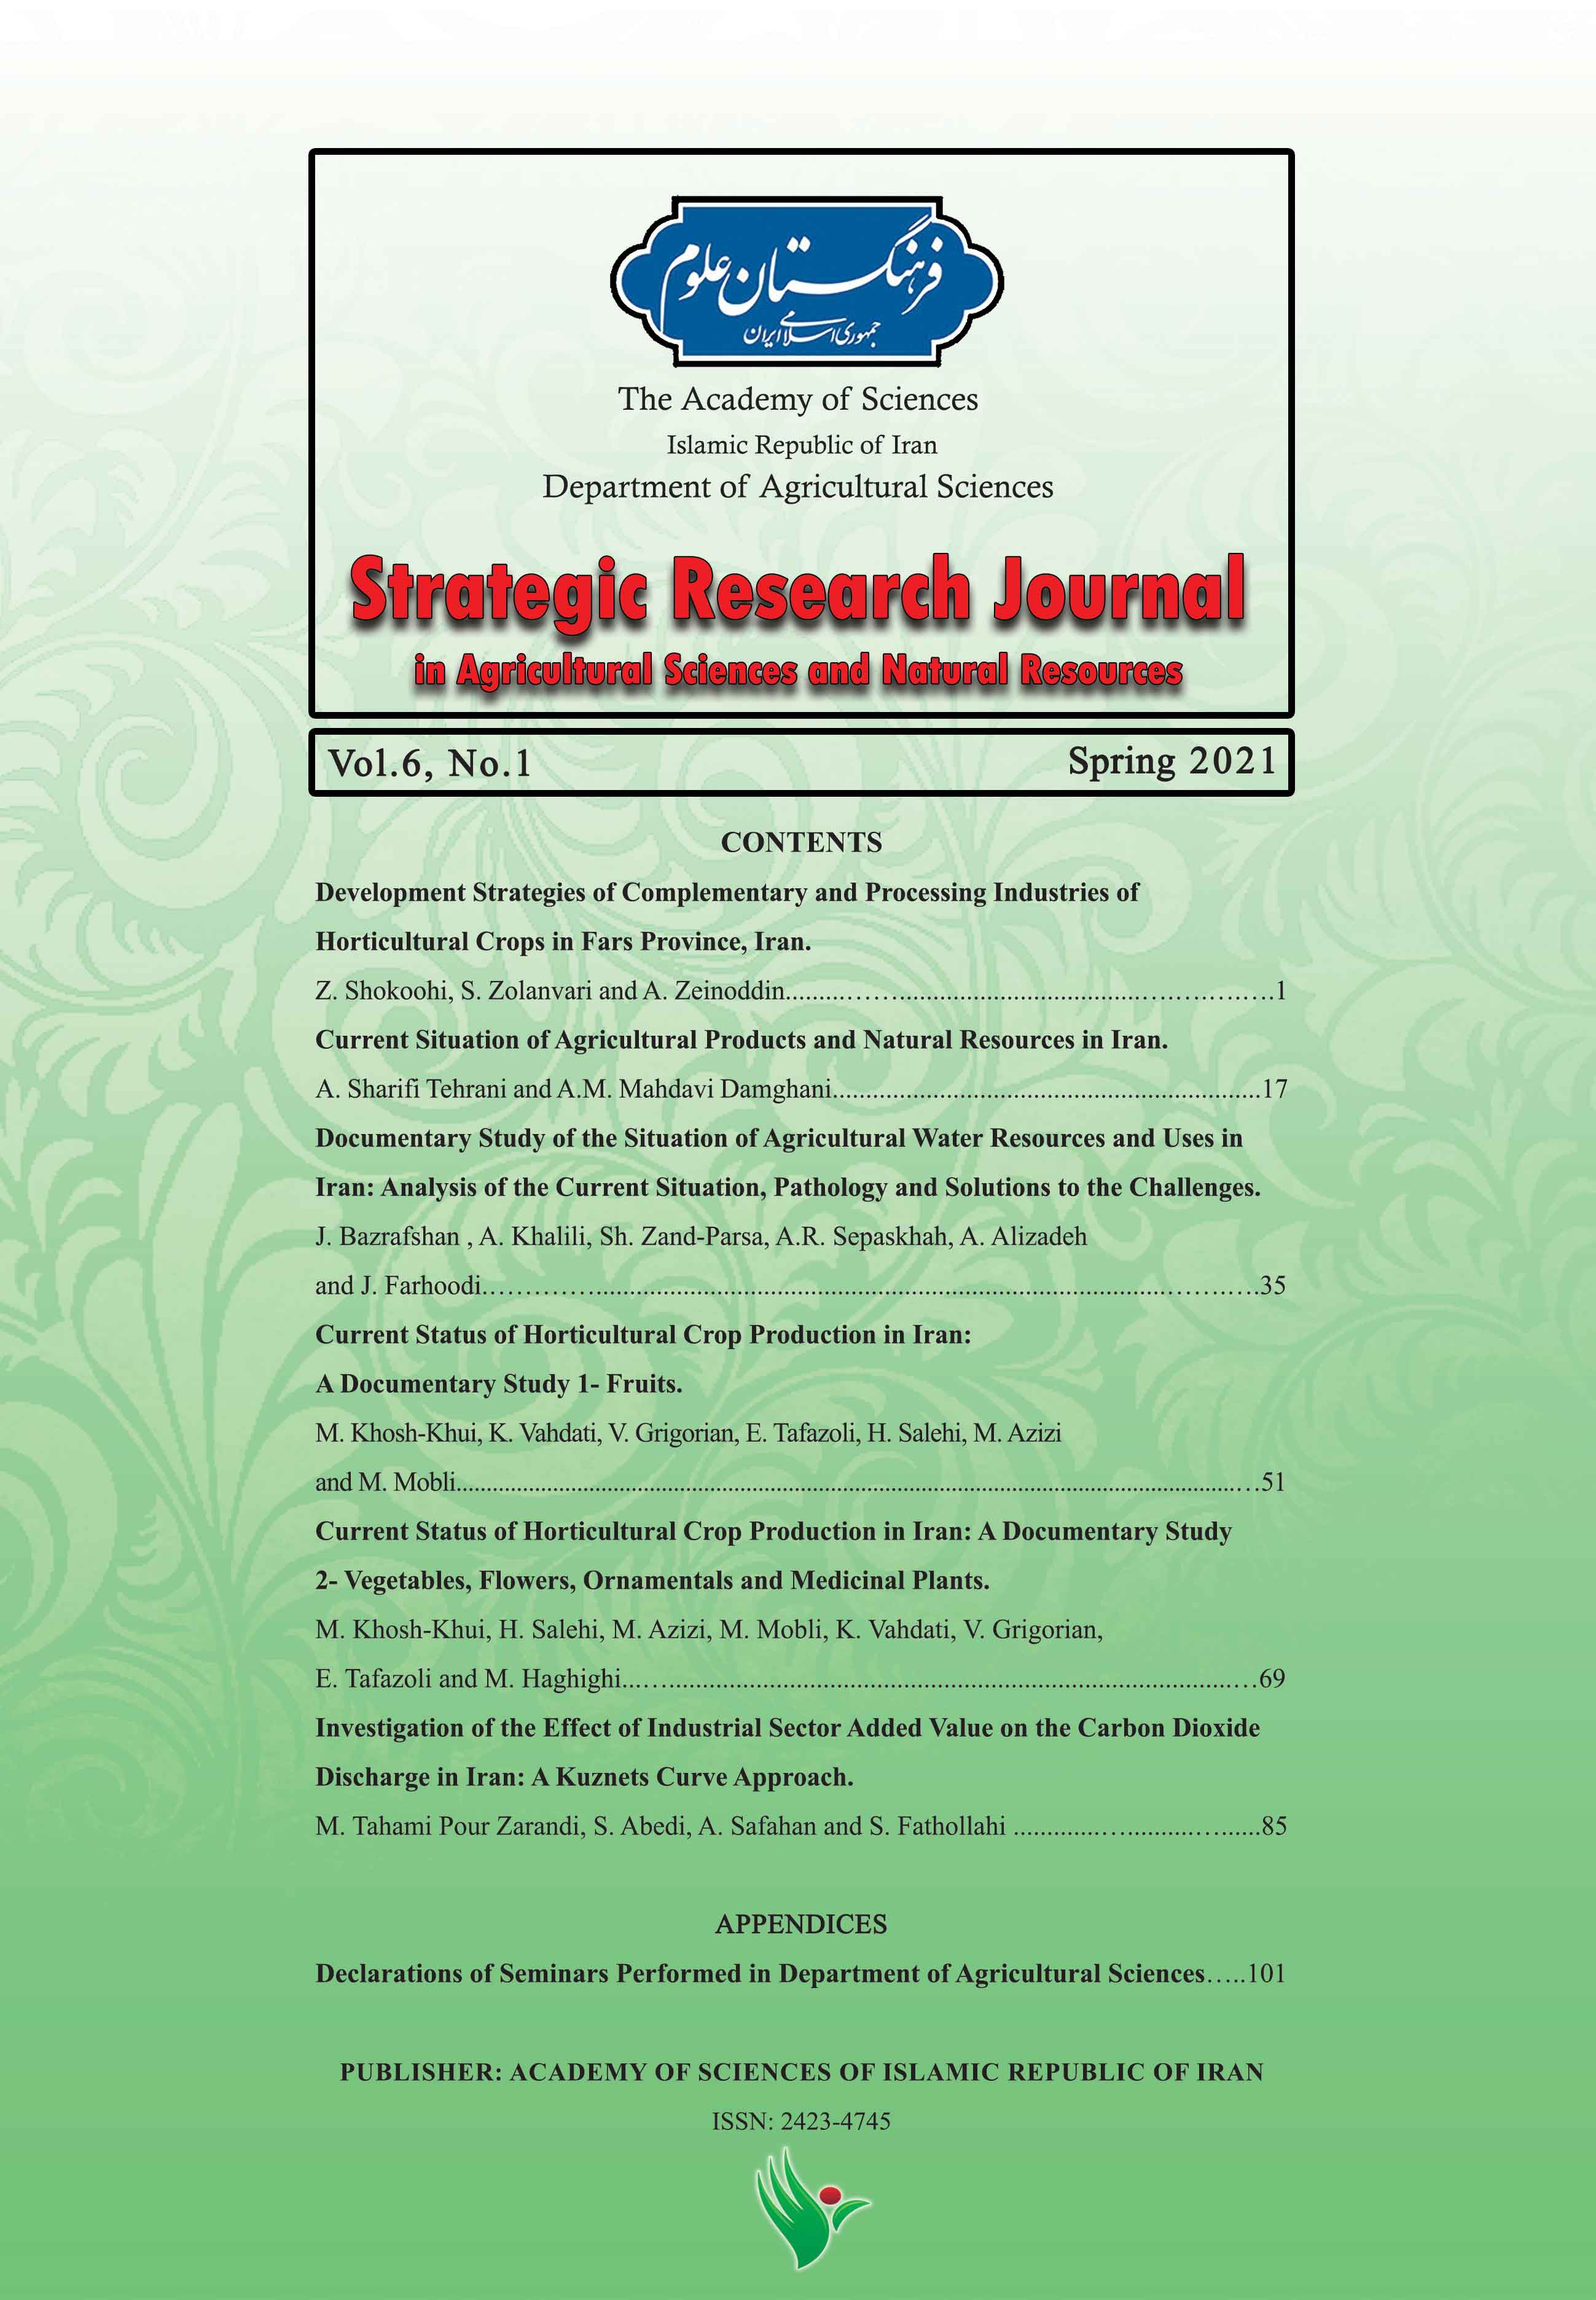 Strategic Research Journal of Agricultural Sciences and Natural Resources